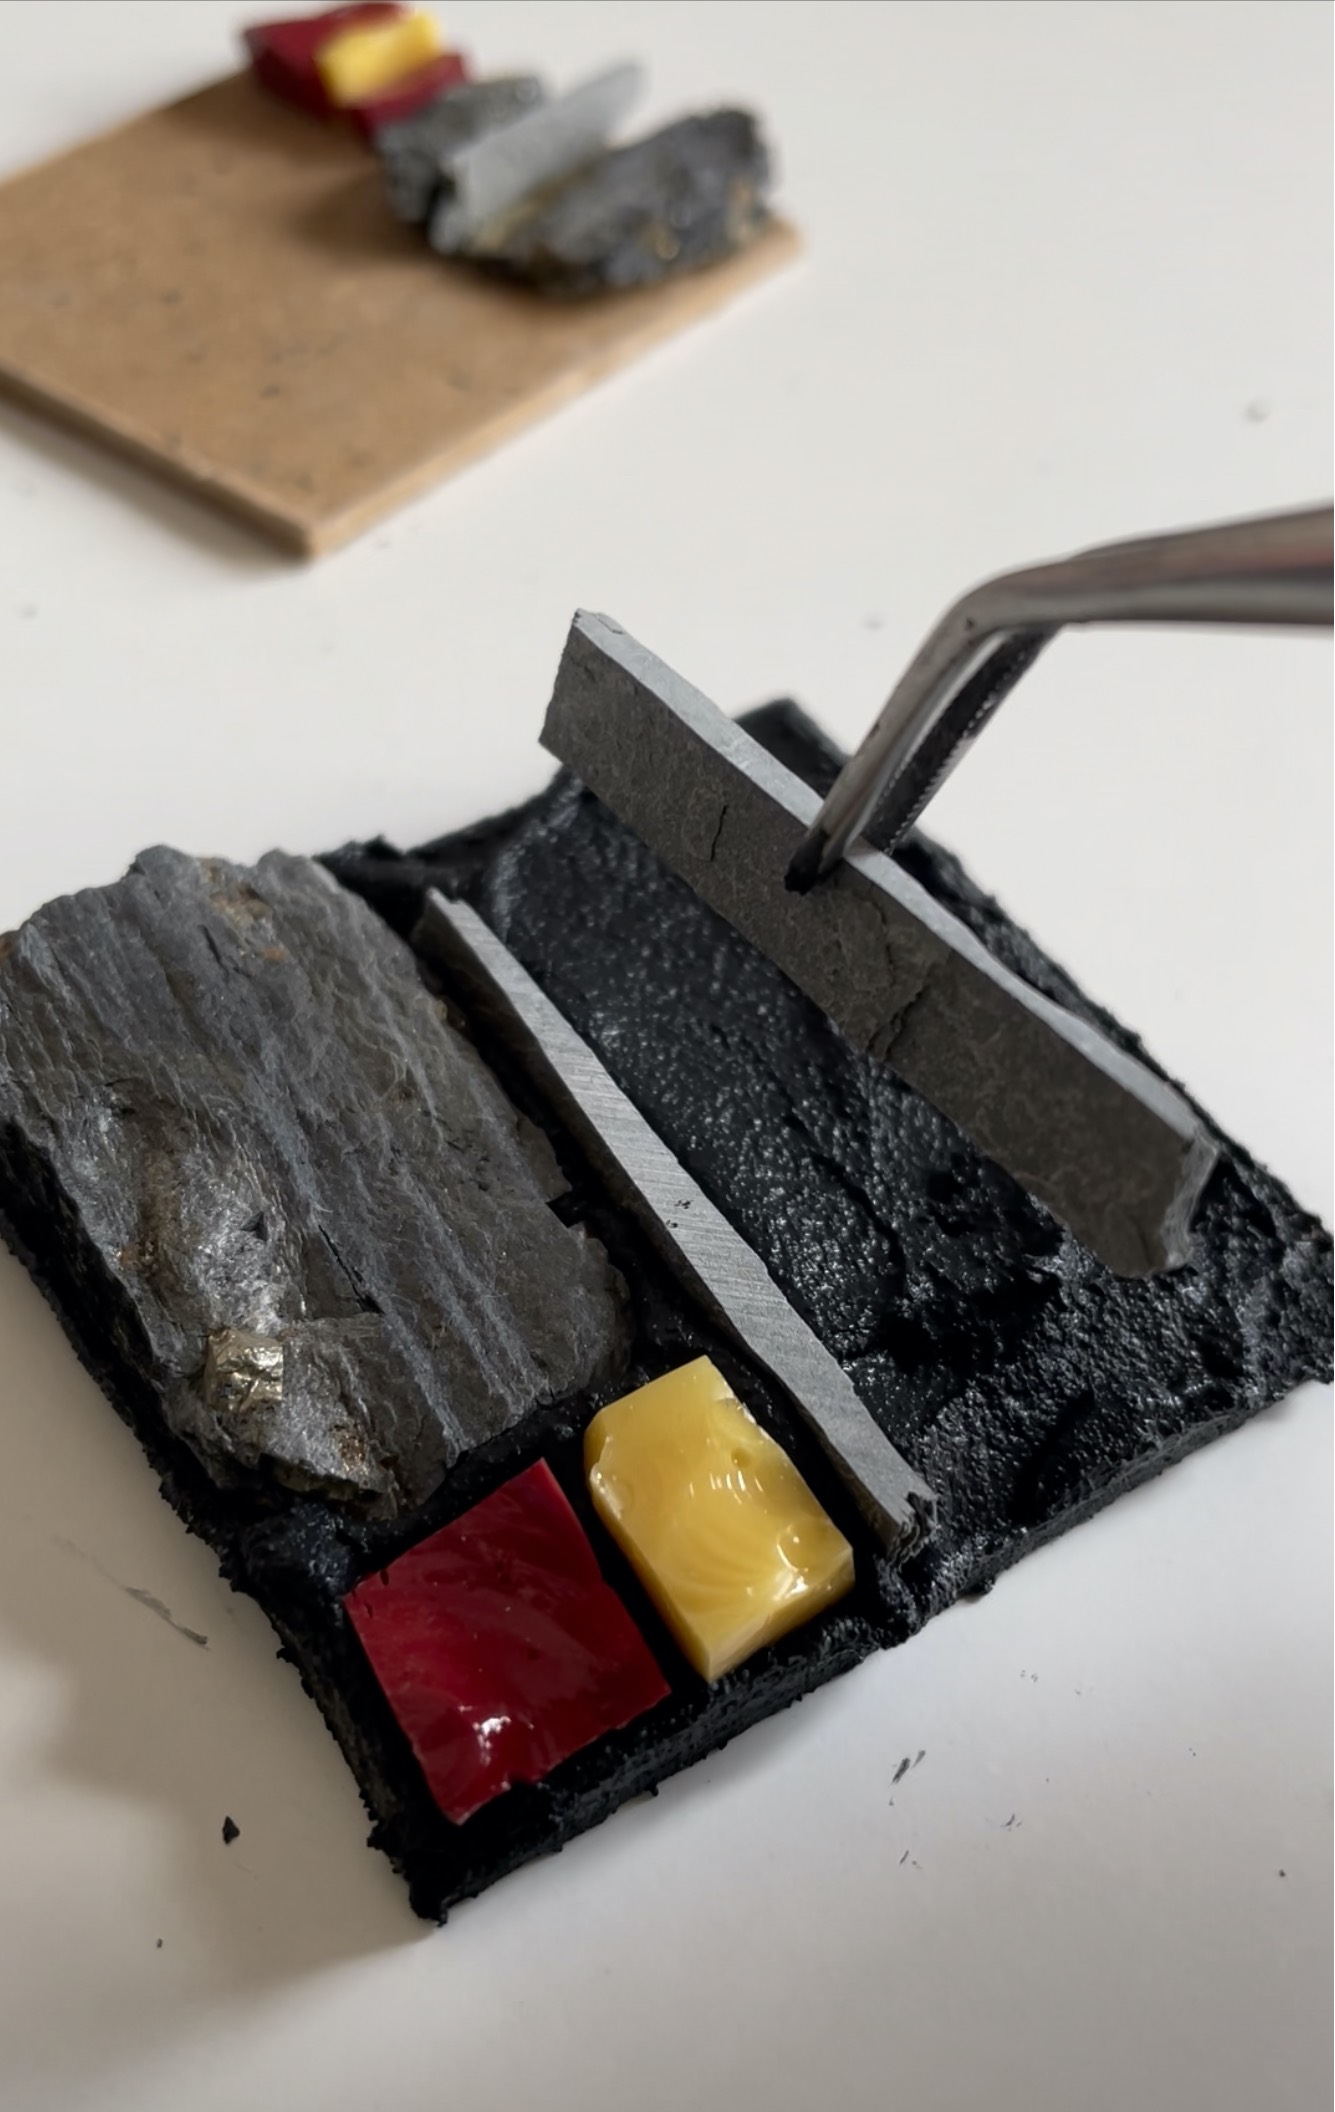 a pair of tweezers holding a piece of slate ready to place it into a mosaic